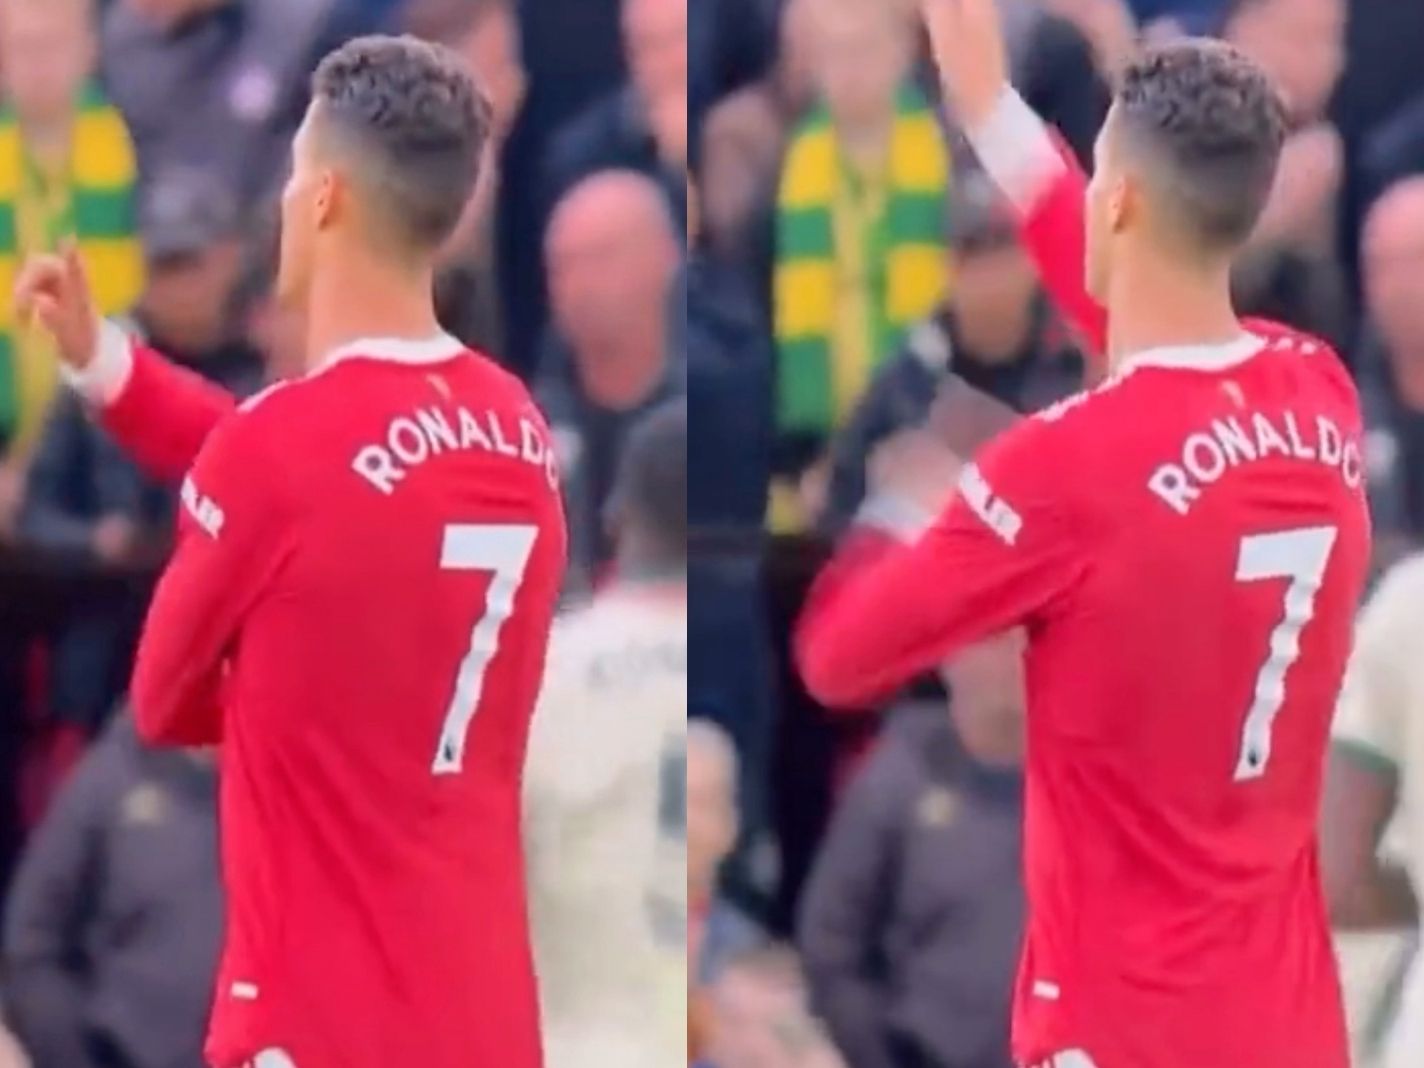 Watch: Cristiano Ronaldo possibly mocking Solskjaer with Doctor Strange hand movements